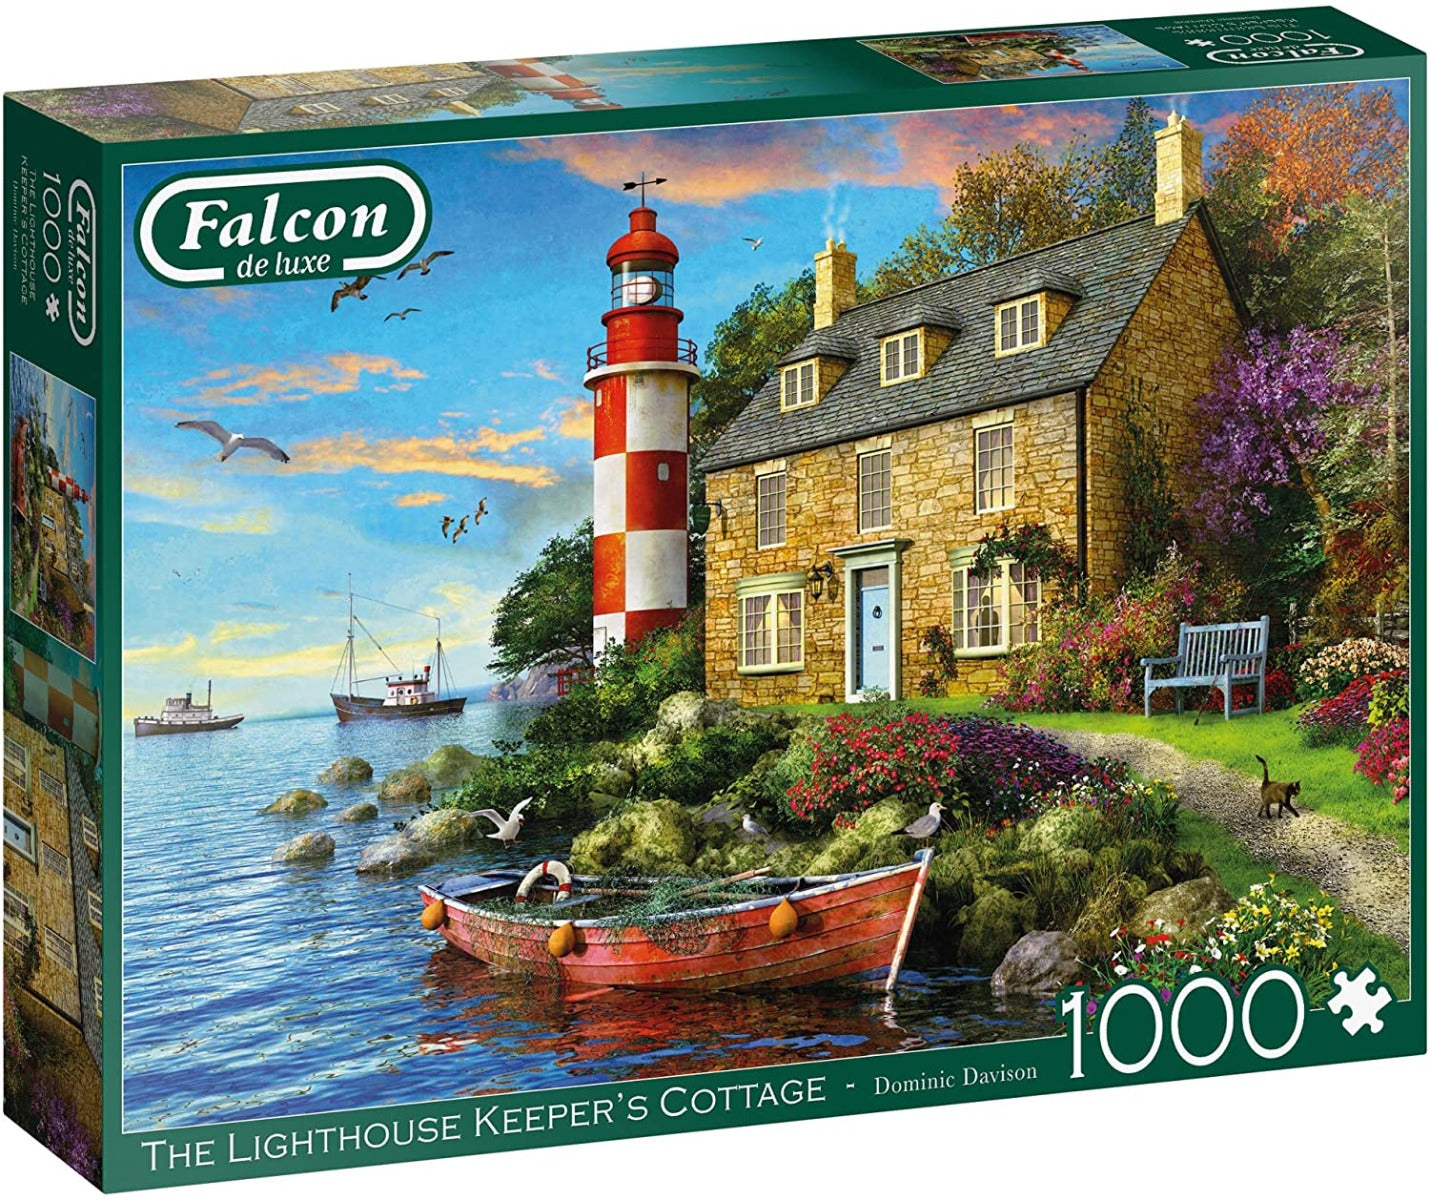 Falcon De Luxe - The Lighthouse Keeper's Cottage - 1000 Piece Jigsaw Puzzle